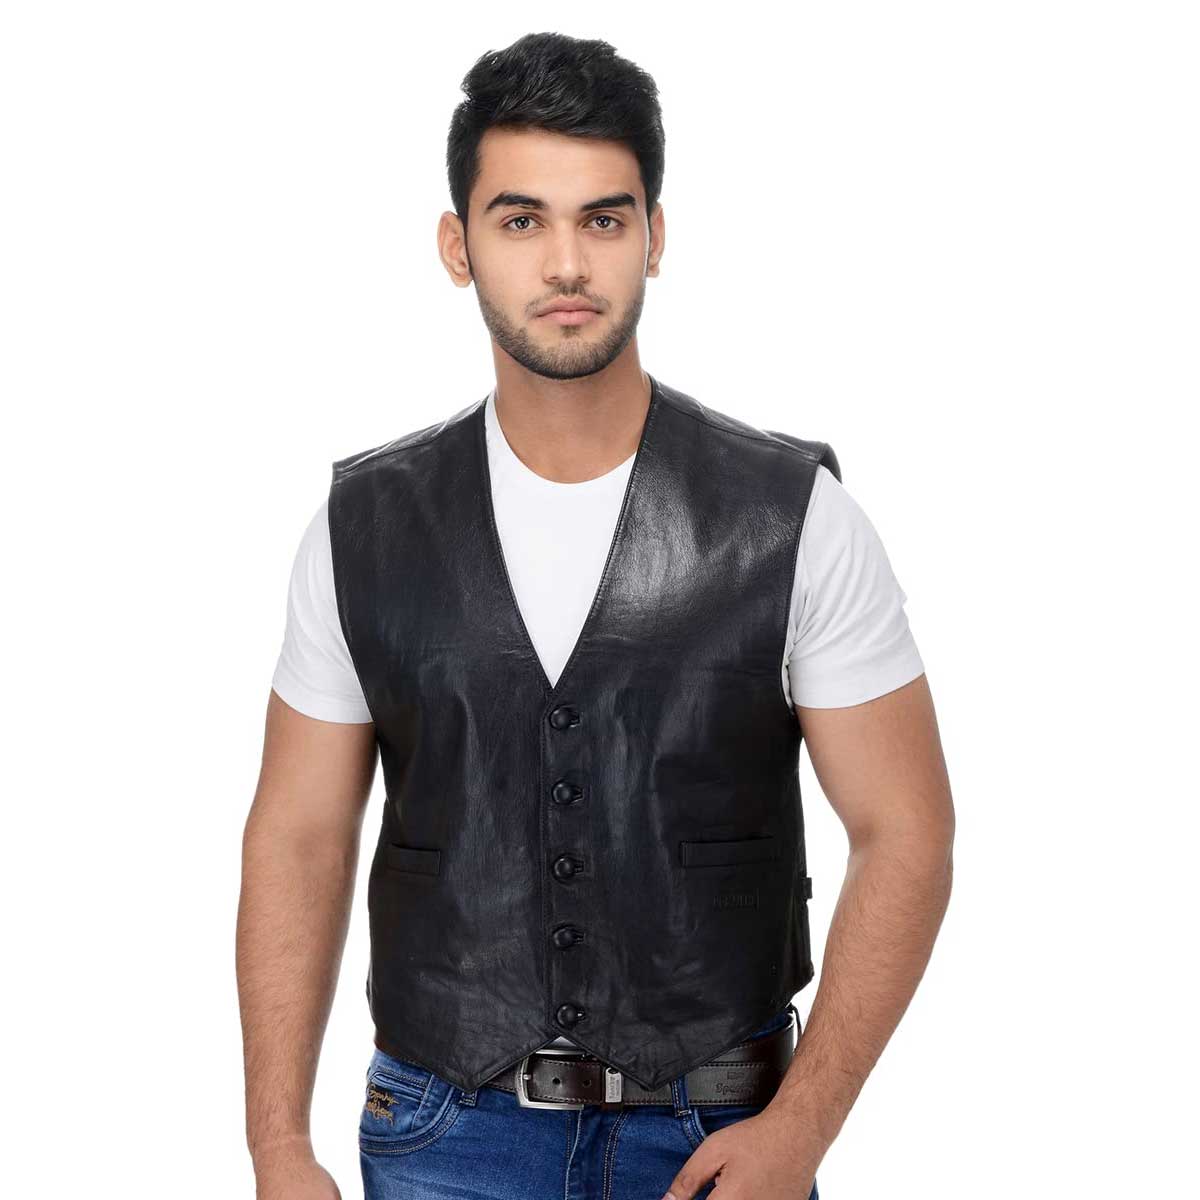 Leather Vest Manufacturers in Italy